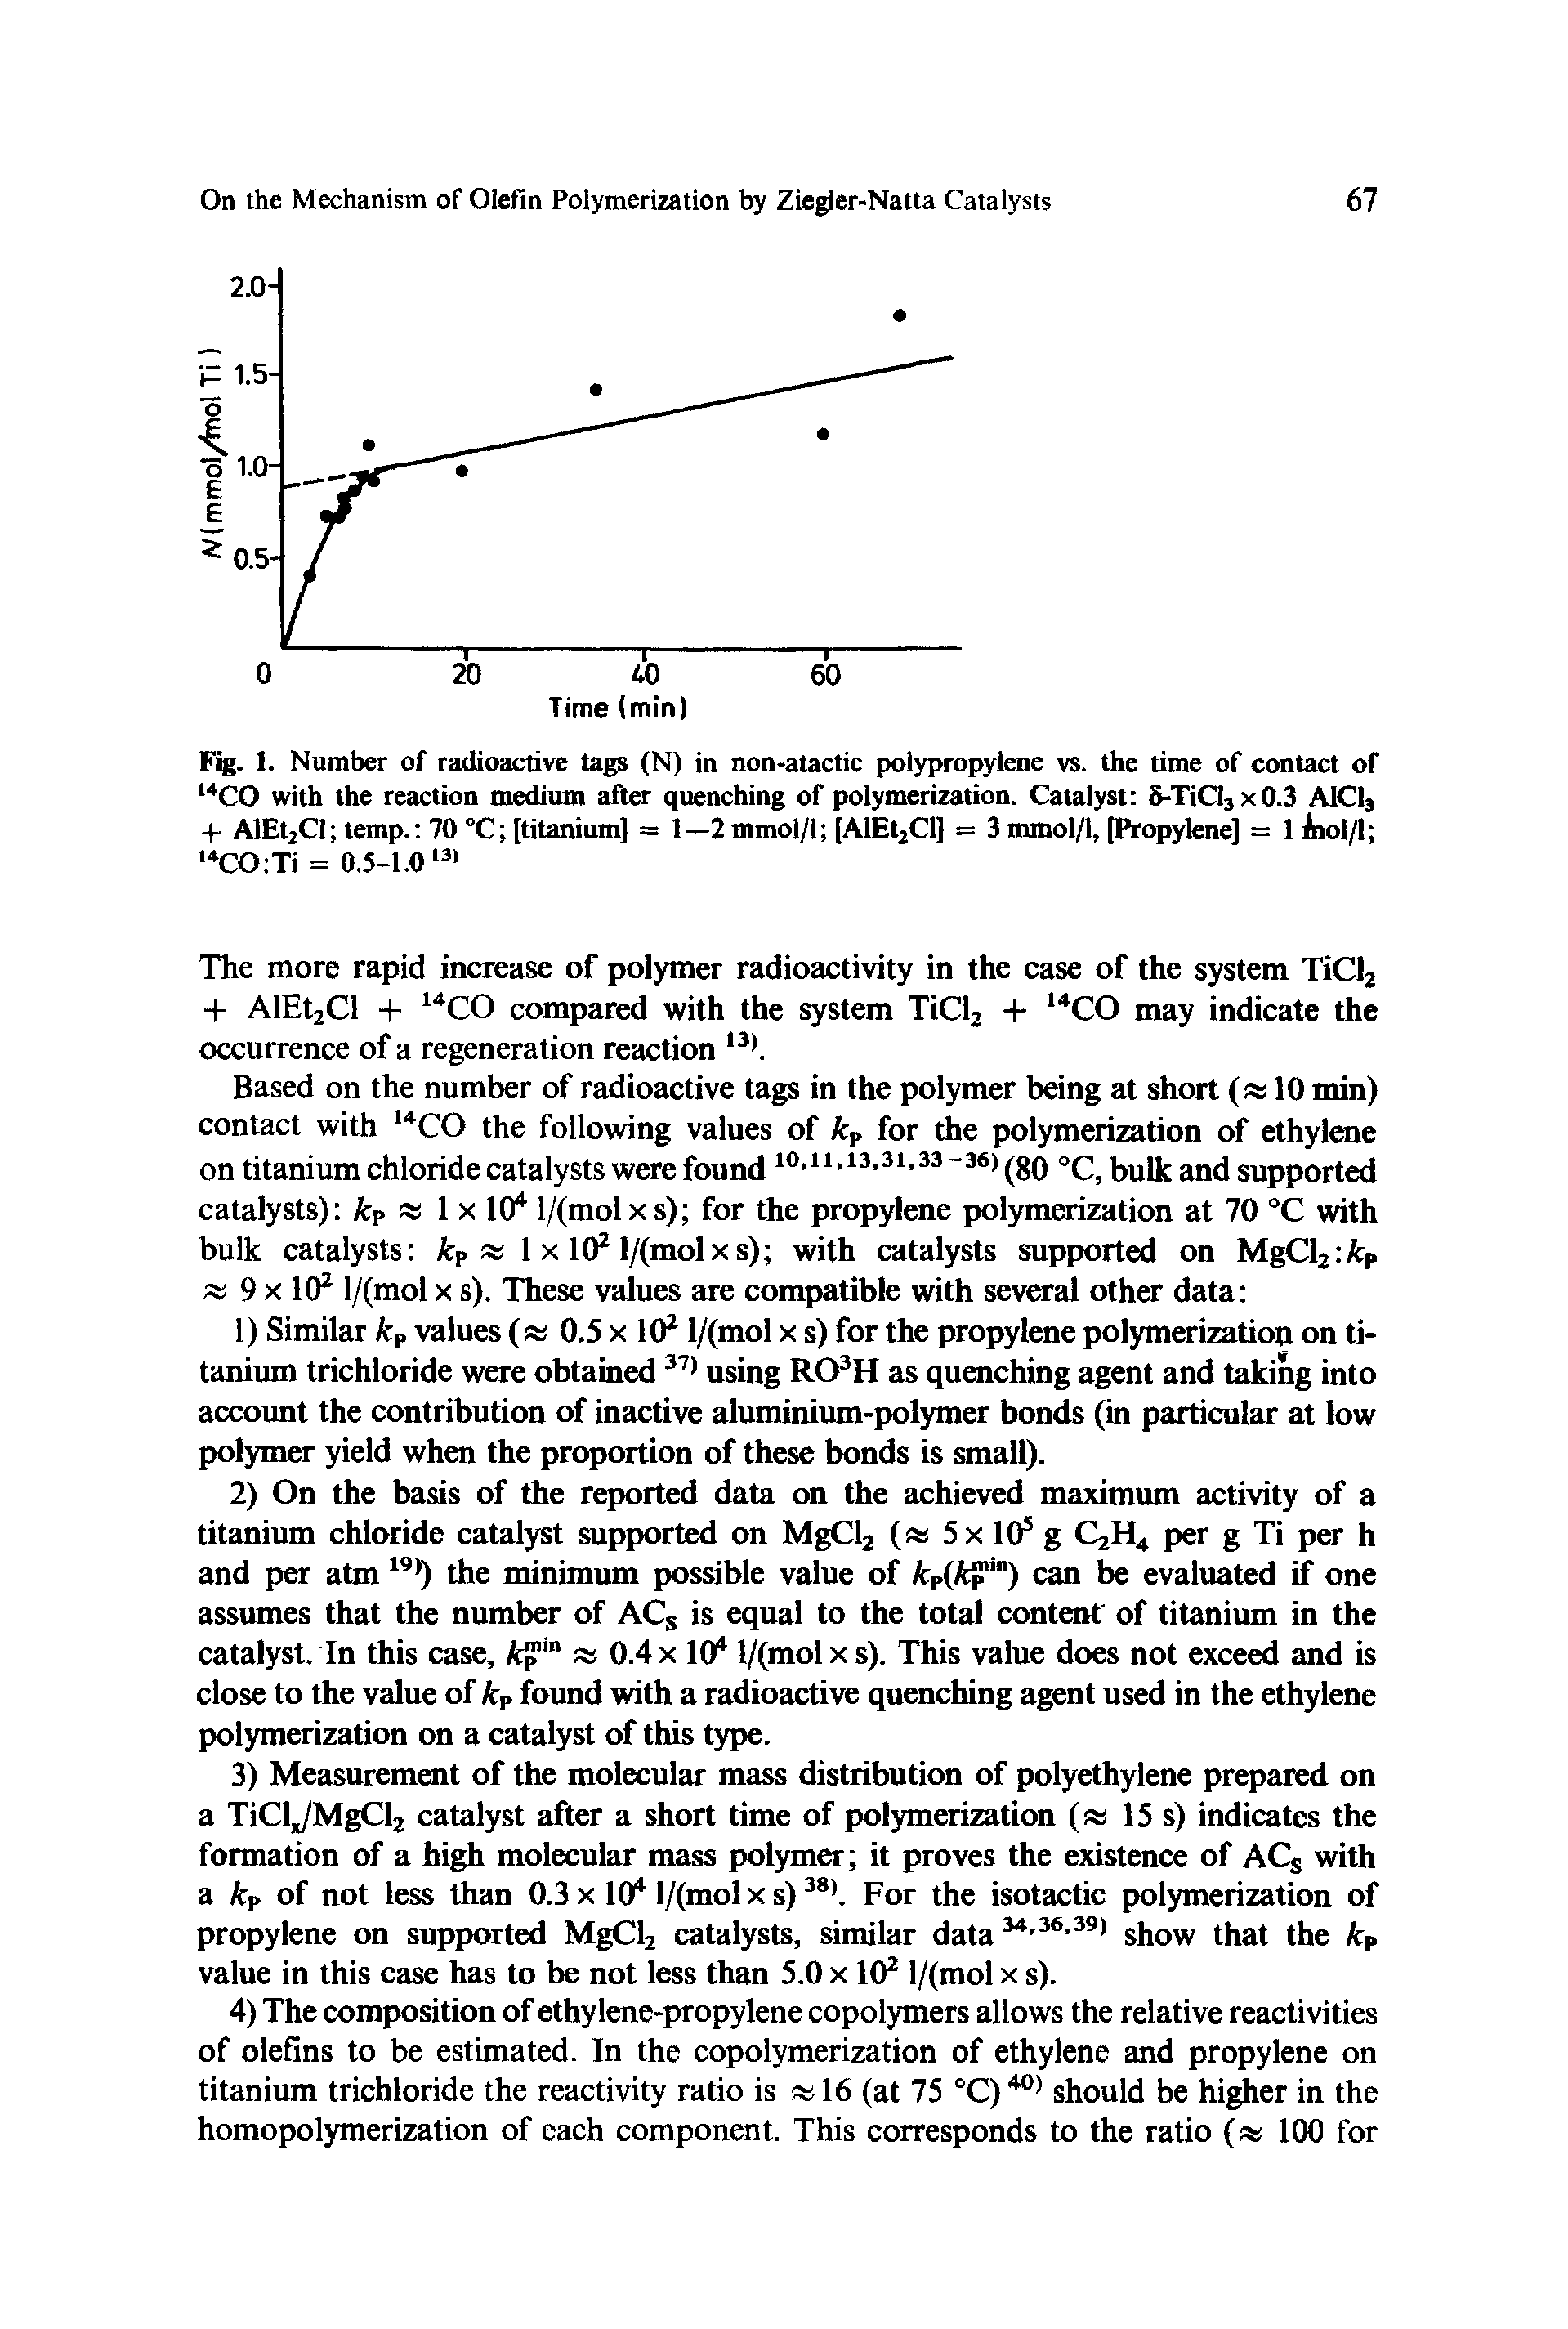 Fig. I. Number of radioactive tags (N) in non-atactic polypropylene vs. the time of contact of CO with the reaction medium after quenching of polymerization. Catalyst S-TiCIsxO.S AlCIa + AlEtjCI temp. 70 °C [titanium] = 1—2 mmol/1 [AlEtaCl] = 3 mmol/1, [Propylene] = 1 Aiol/I CO Ti = 0.5-1.0...